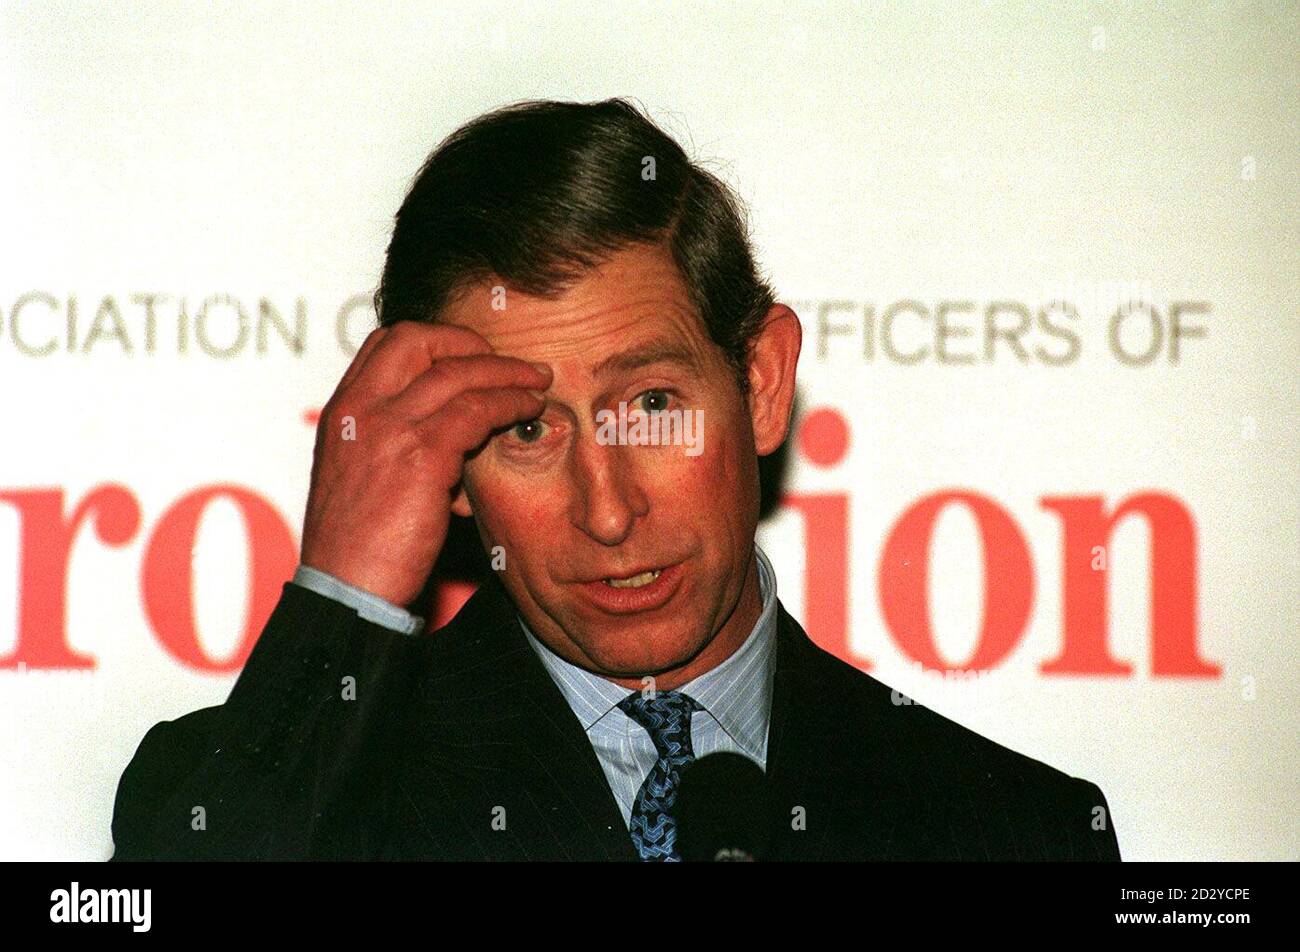 PA NEWS PHOTO 29/01/98 PRINCE CHARLES, PRINCE OF WALES AT THE CLOSING SESSION OF THE SEMINAR AT THE PRINCE'S TRUST NATIONAL CONFERENCE FOR THE PROBATION SERVICE AT THE CORPORATION OF LONDON, GUILDHALL Stock Photo